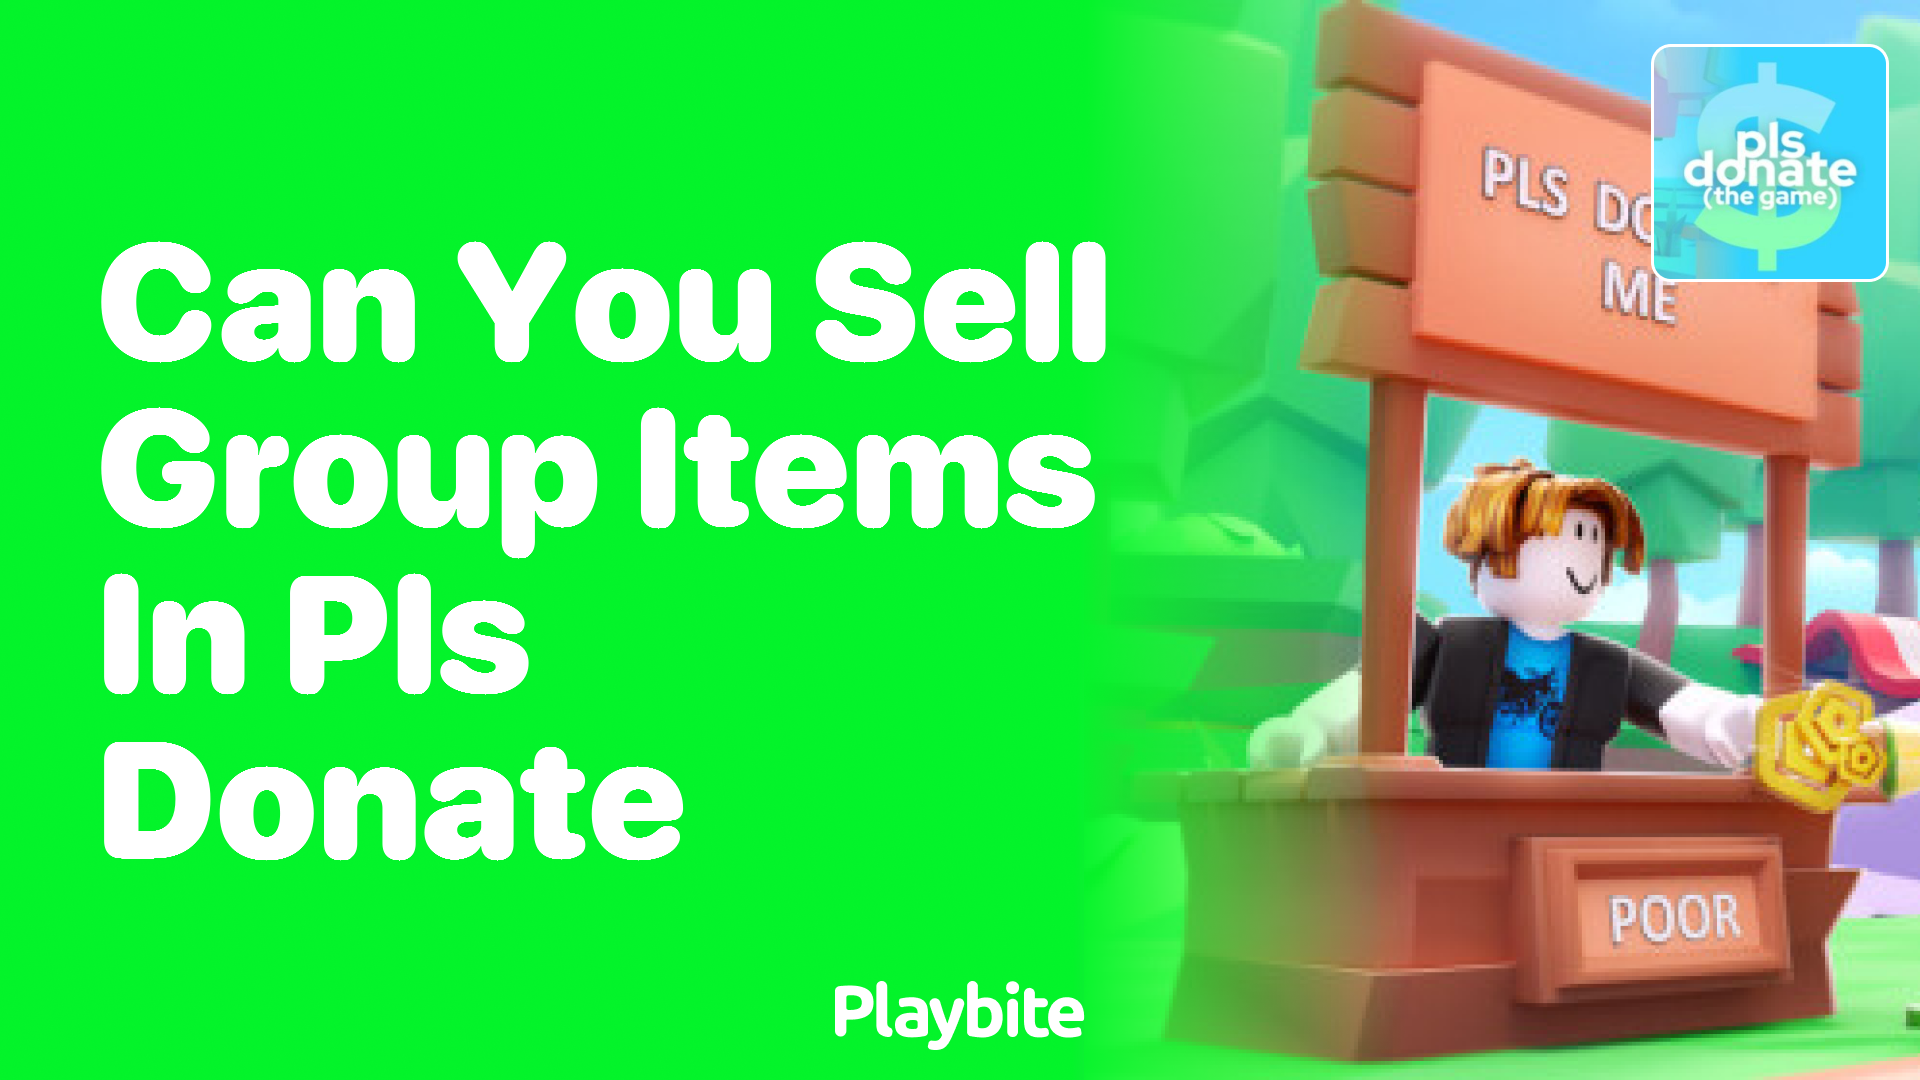 Can You Sell Group Items in PLS DONATE?